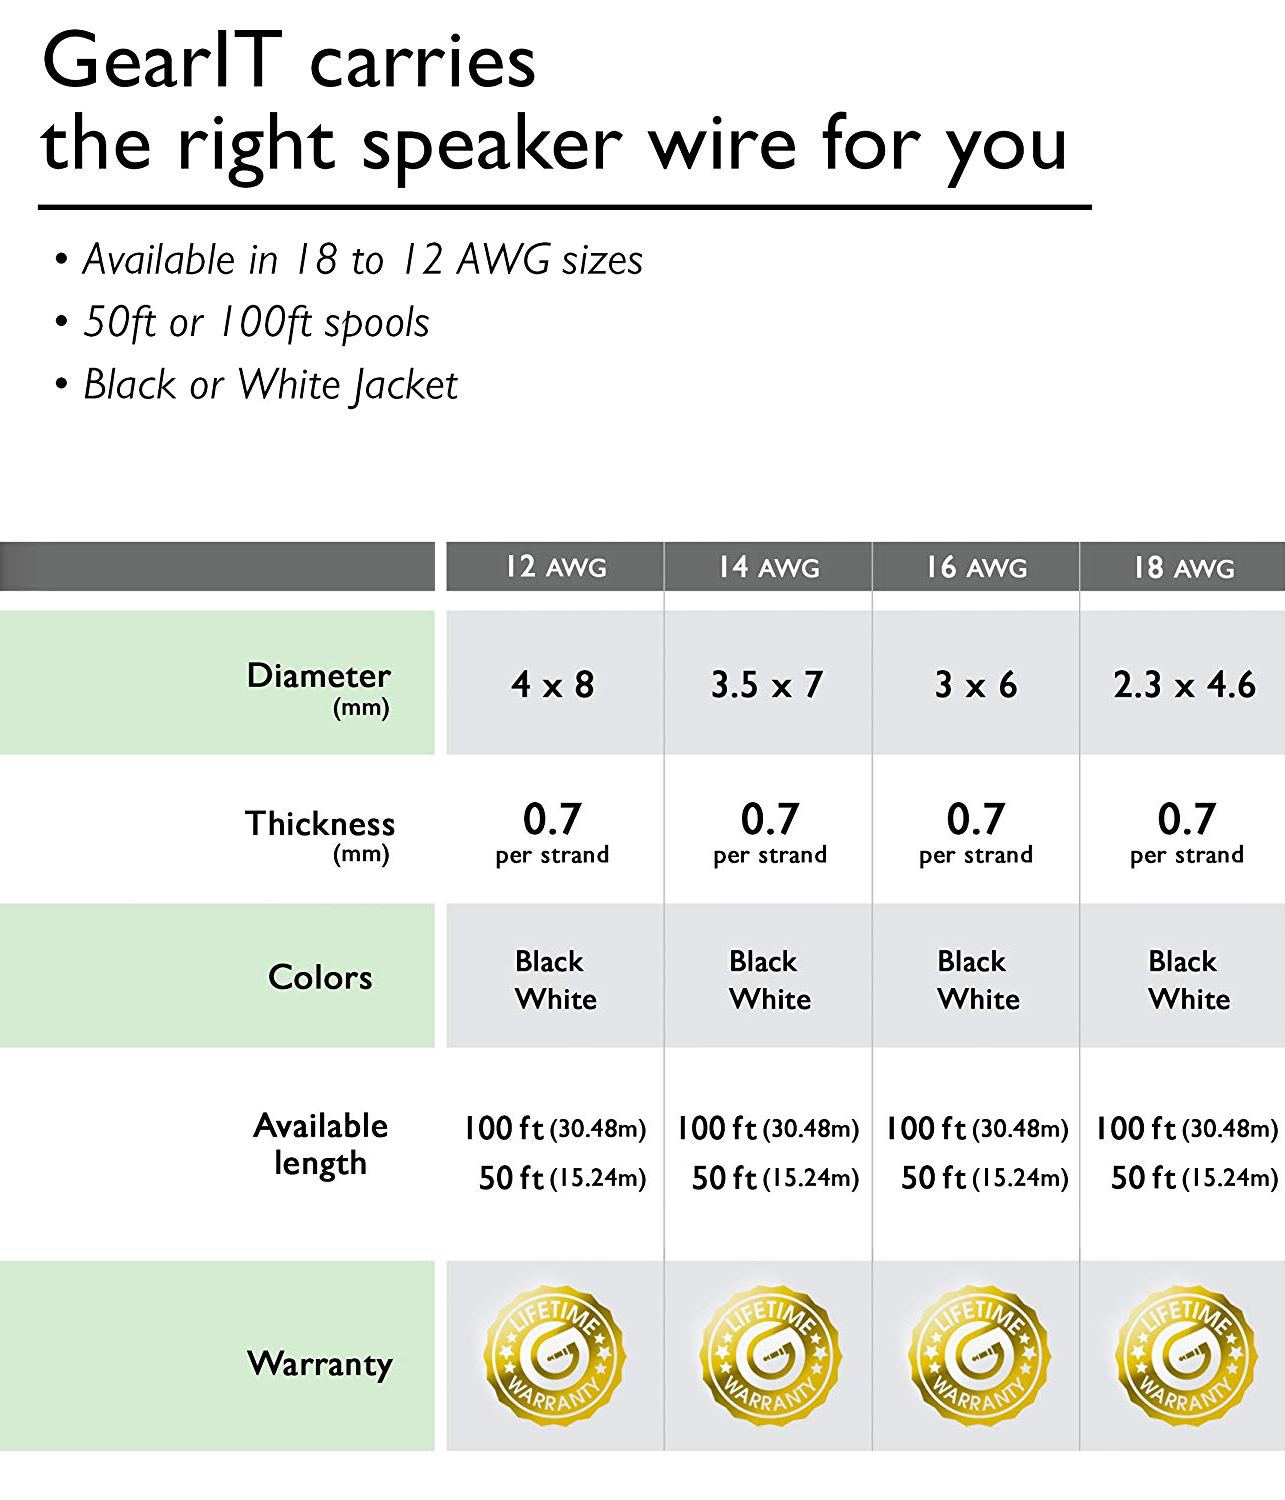 16AWG Speaker Wire, GearIT Pro Series 16 Gauge Speaker Wire Cable (50 Feet / 15 Meters) Great Use for Home Theater Speakers and Car Speakers, White - image 5 of 7